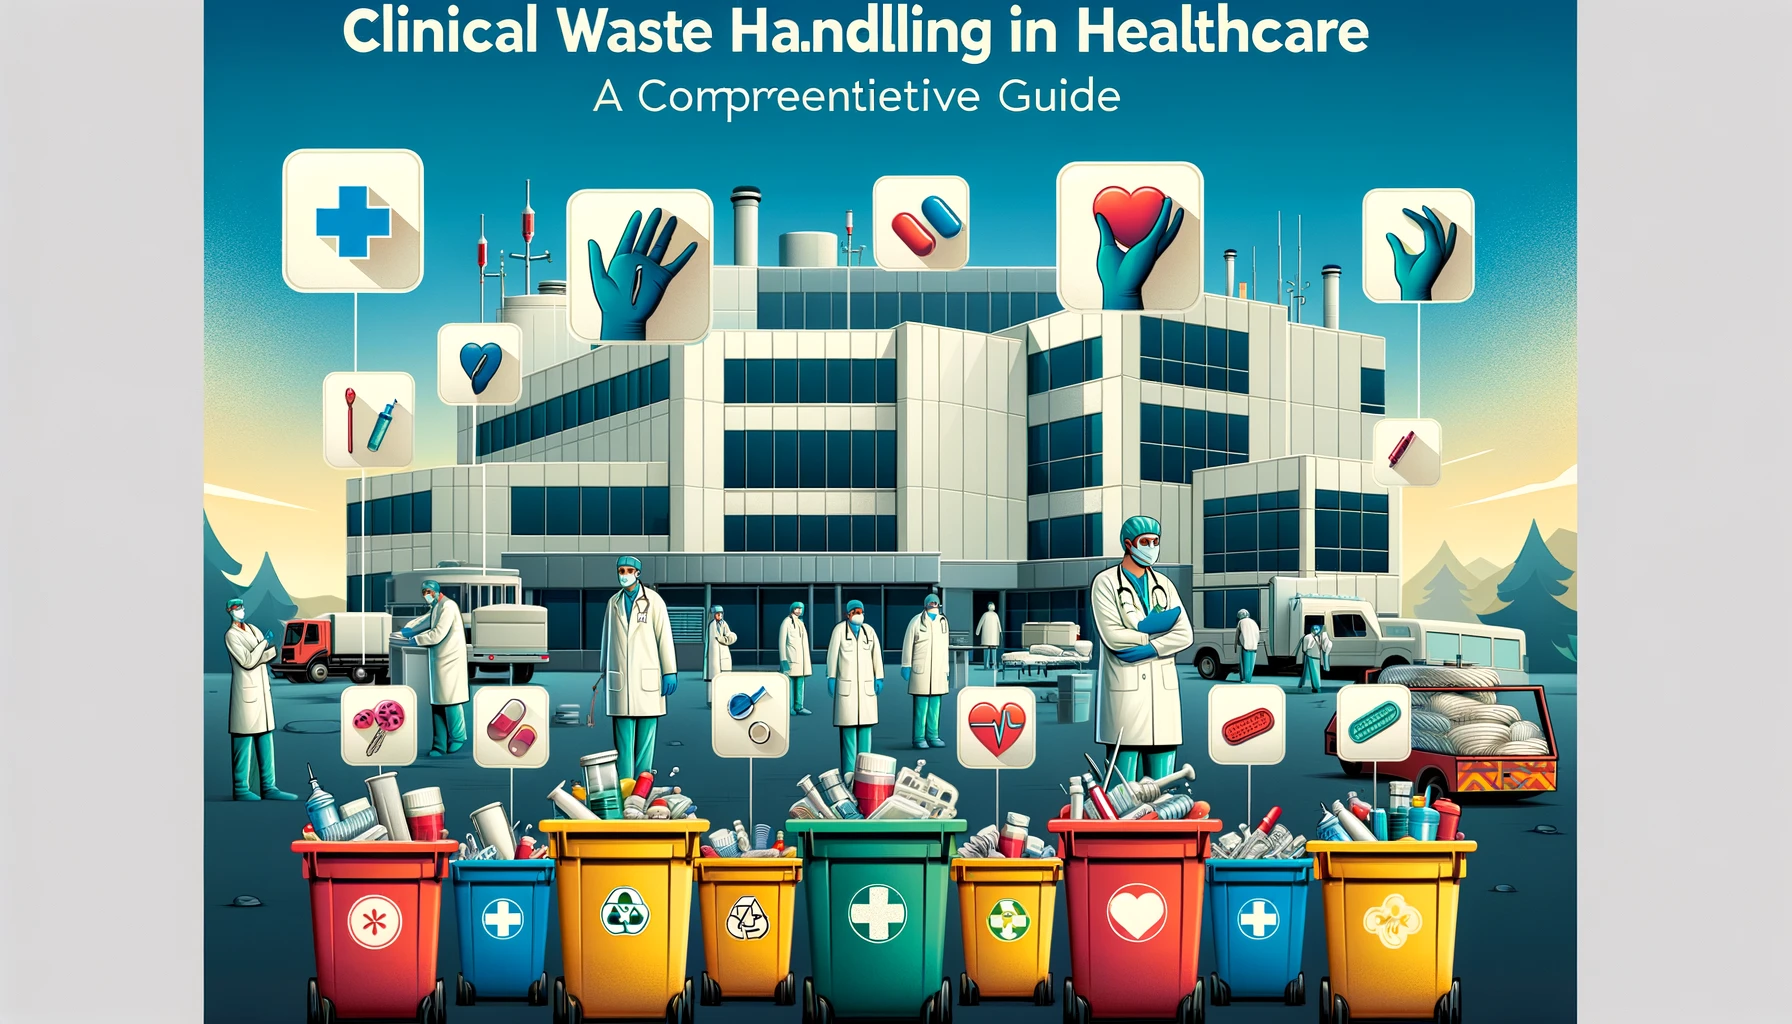 Key Considerations for Clinical Waste Handling